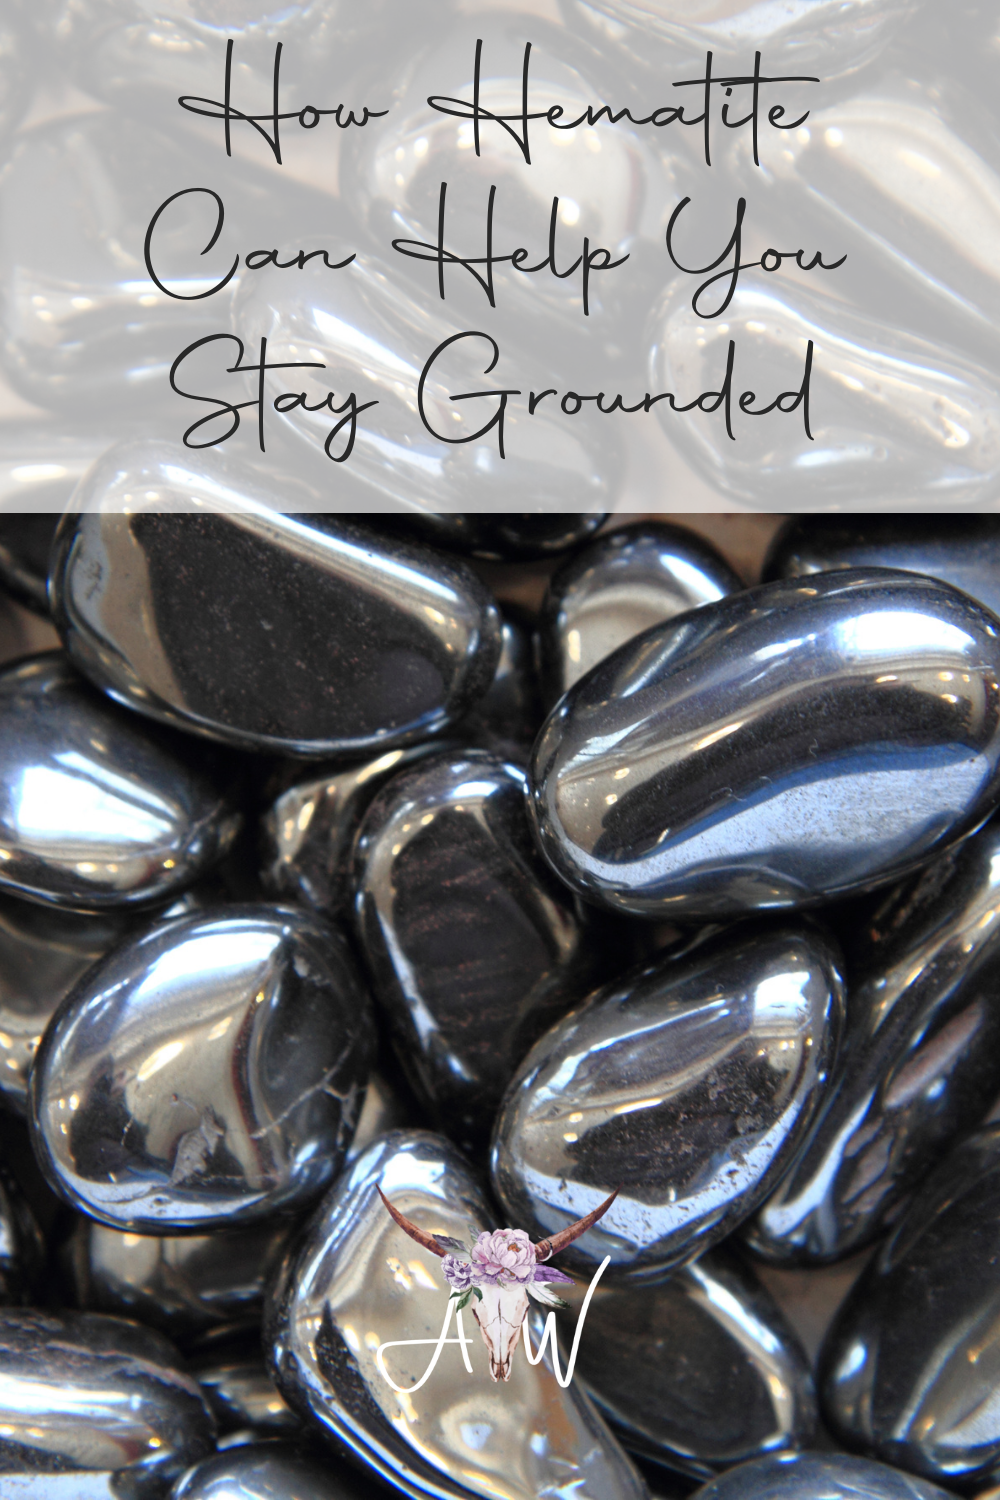 Hematite - Use for Grounding and to deflect negativity